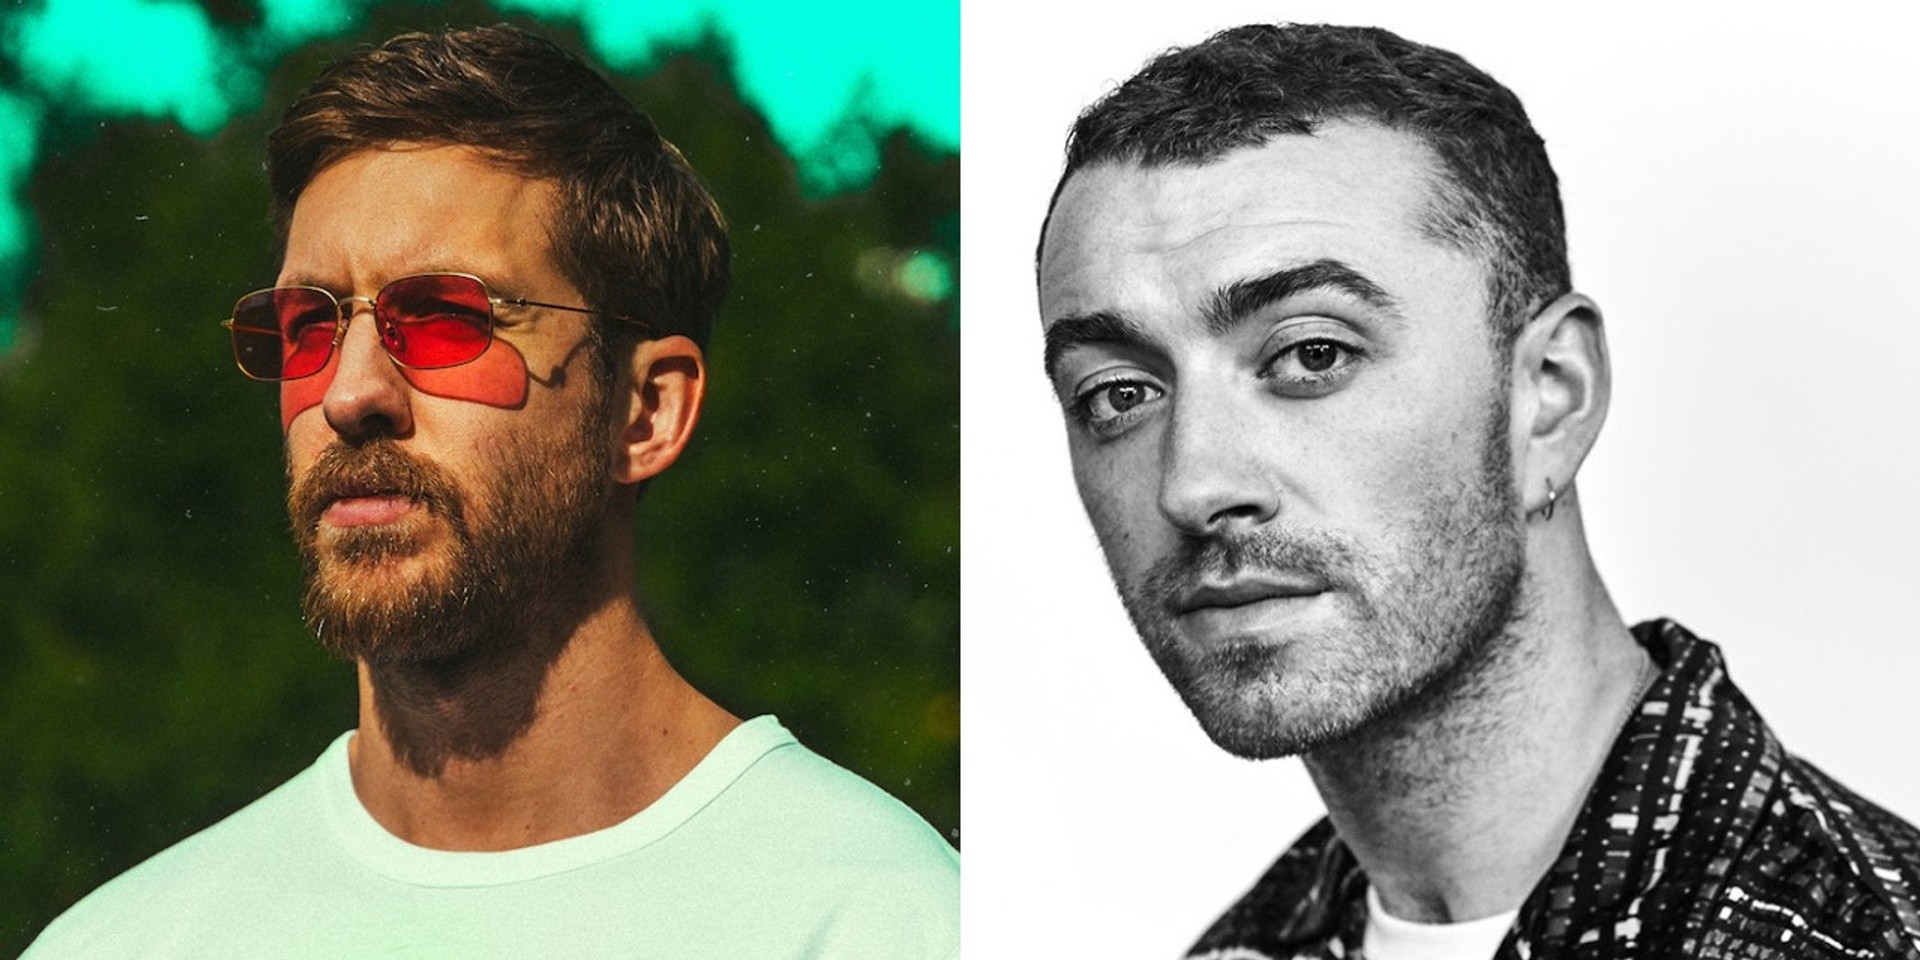 Calvin Harris and Sam Smith unite for 'Promises' but it doesn't go well– listen